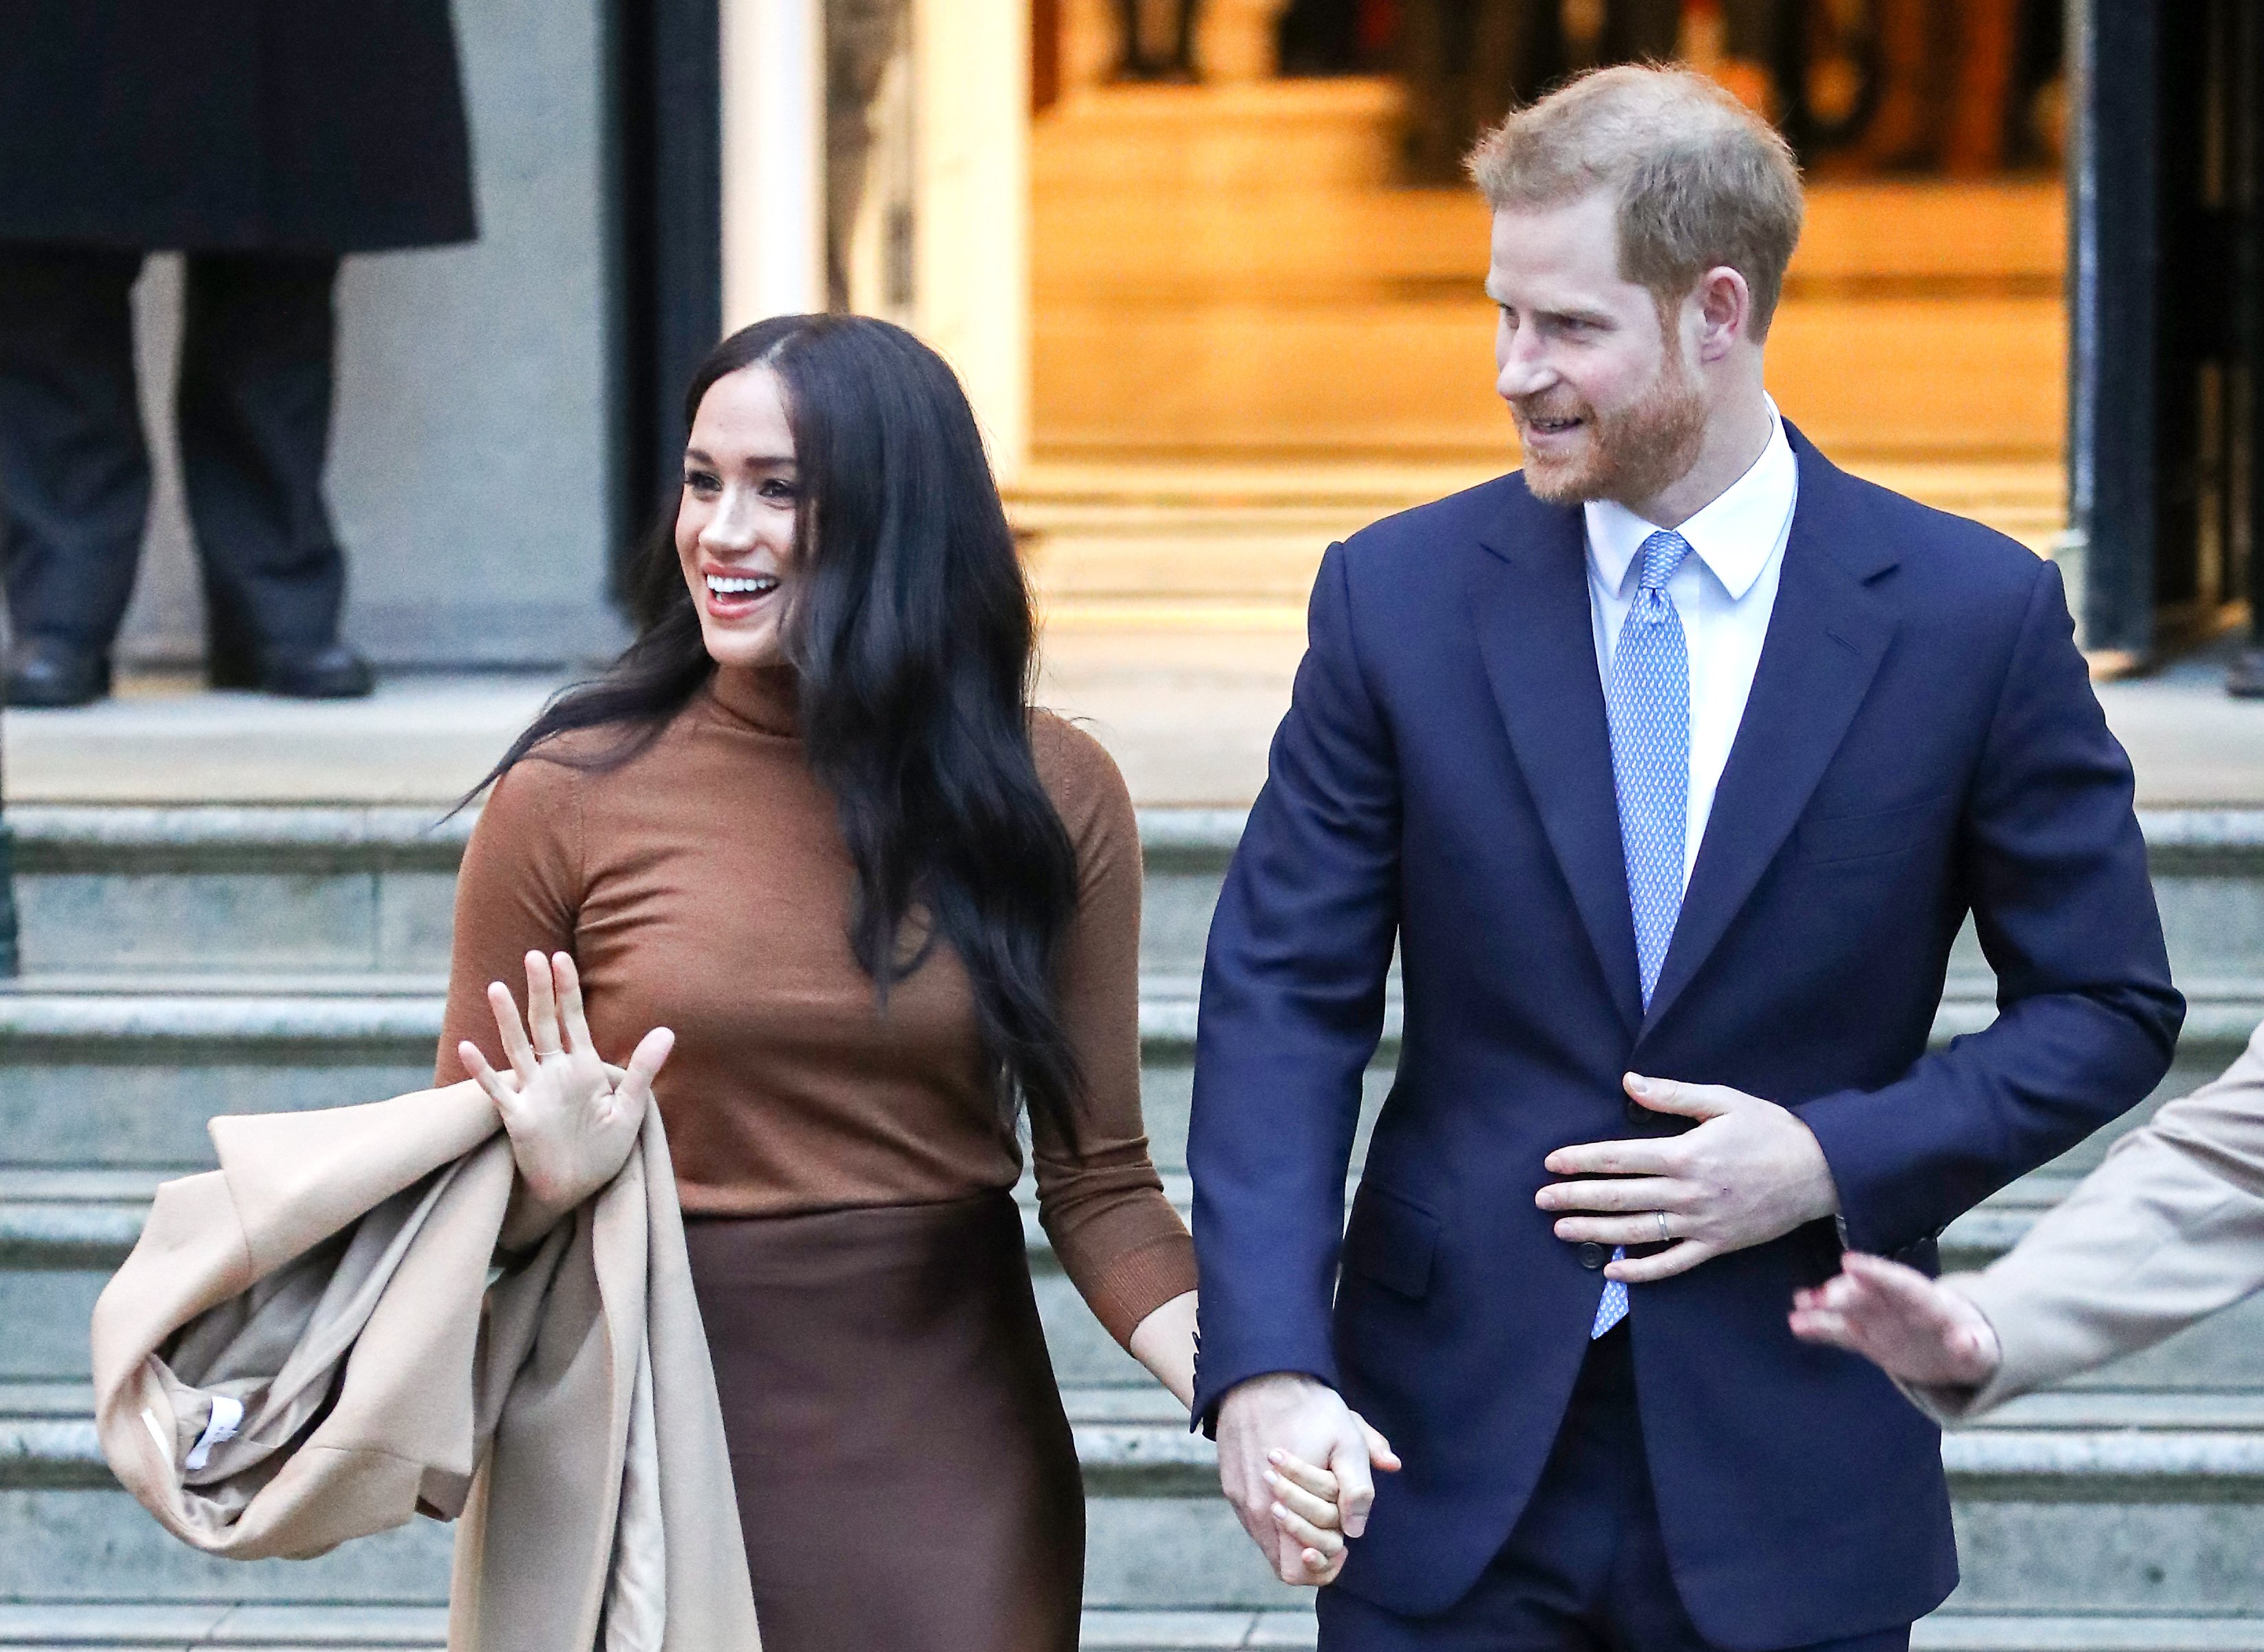 Meghan Markle and Prince Harry leave the Canada House in London, England on January 7, 2020 | Photo: Getty Images